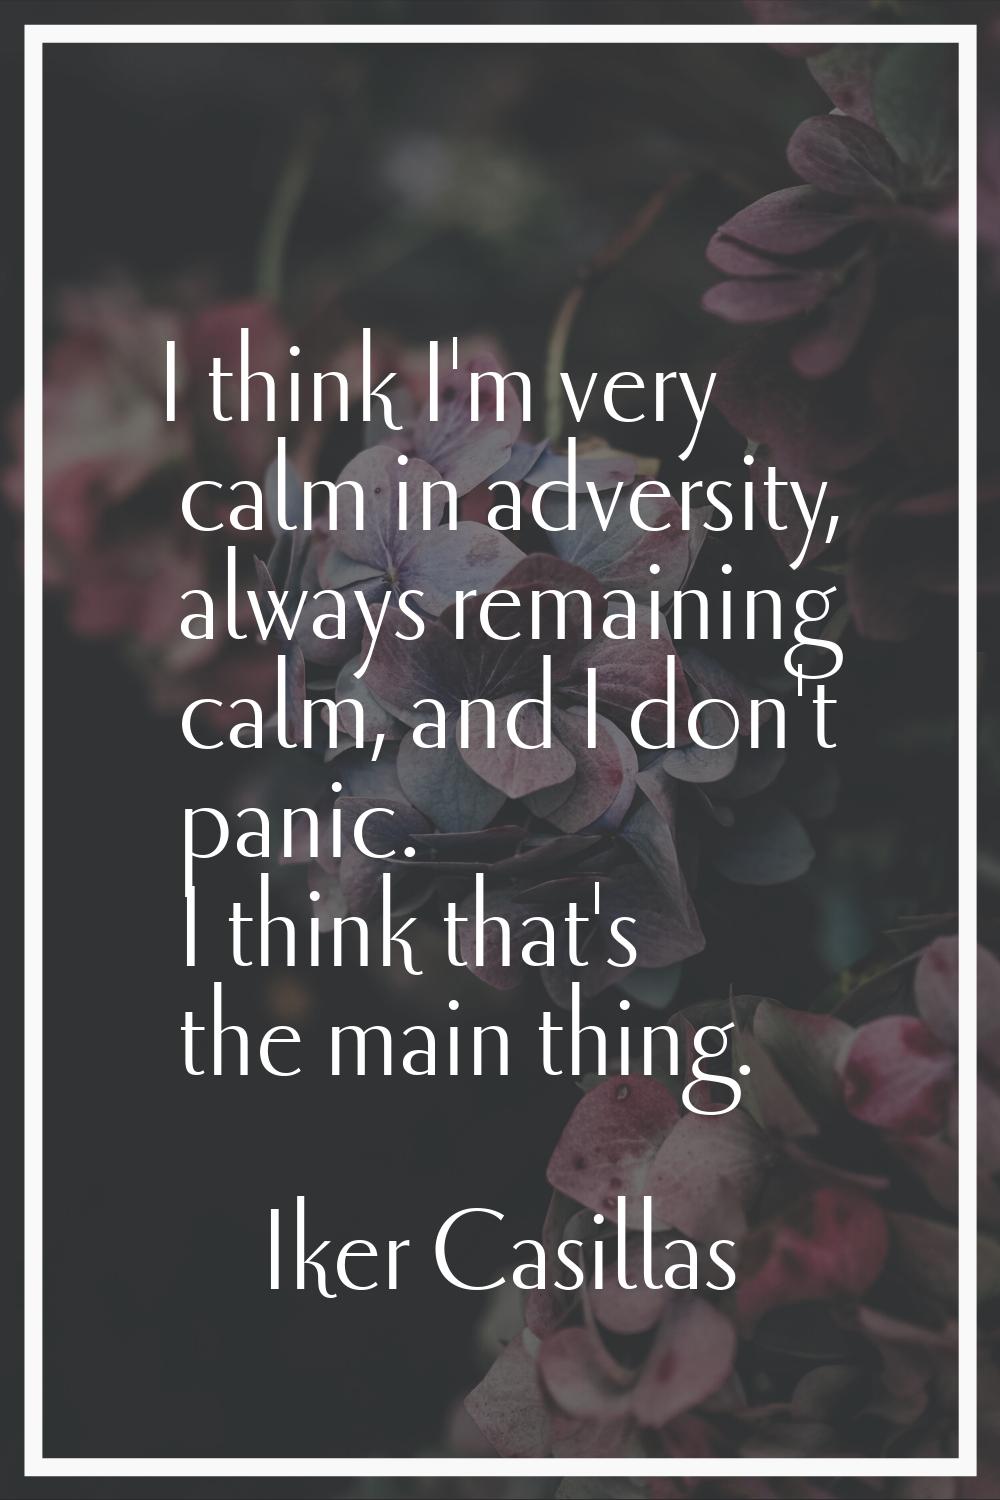 I think I'm very calm in adversity, always remaining calm, and I don't panic. I think that's the ma